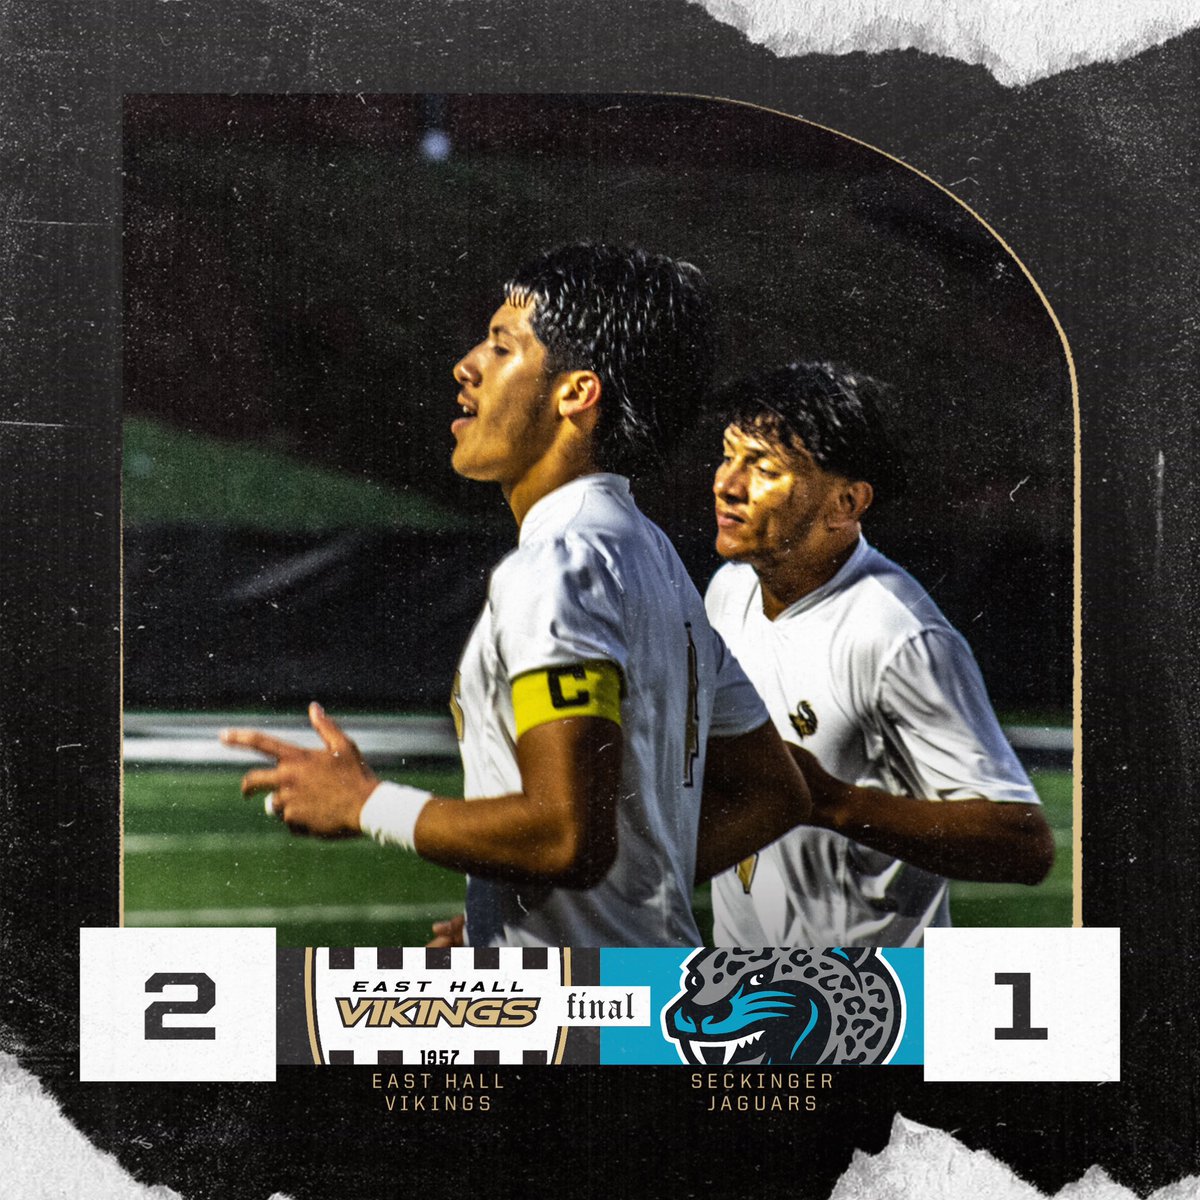 East Hall picks up a 2-1 region win over Seckinger on the road tonight. Orlin’s Yanes and Jonathan Torres both scored and Wilder Velasquez provided an assist. We finish out the season on Friday at Habersham. Let go Vikings!